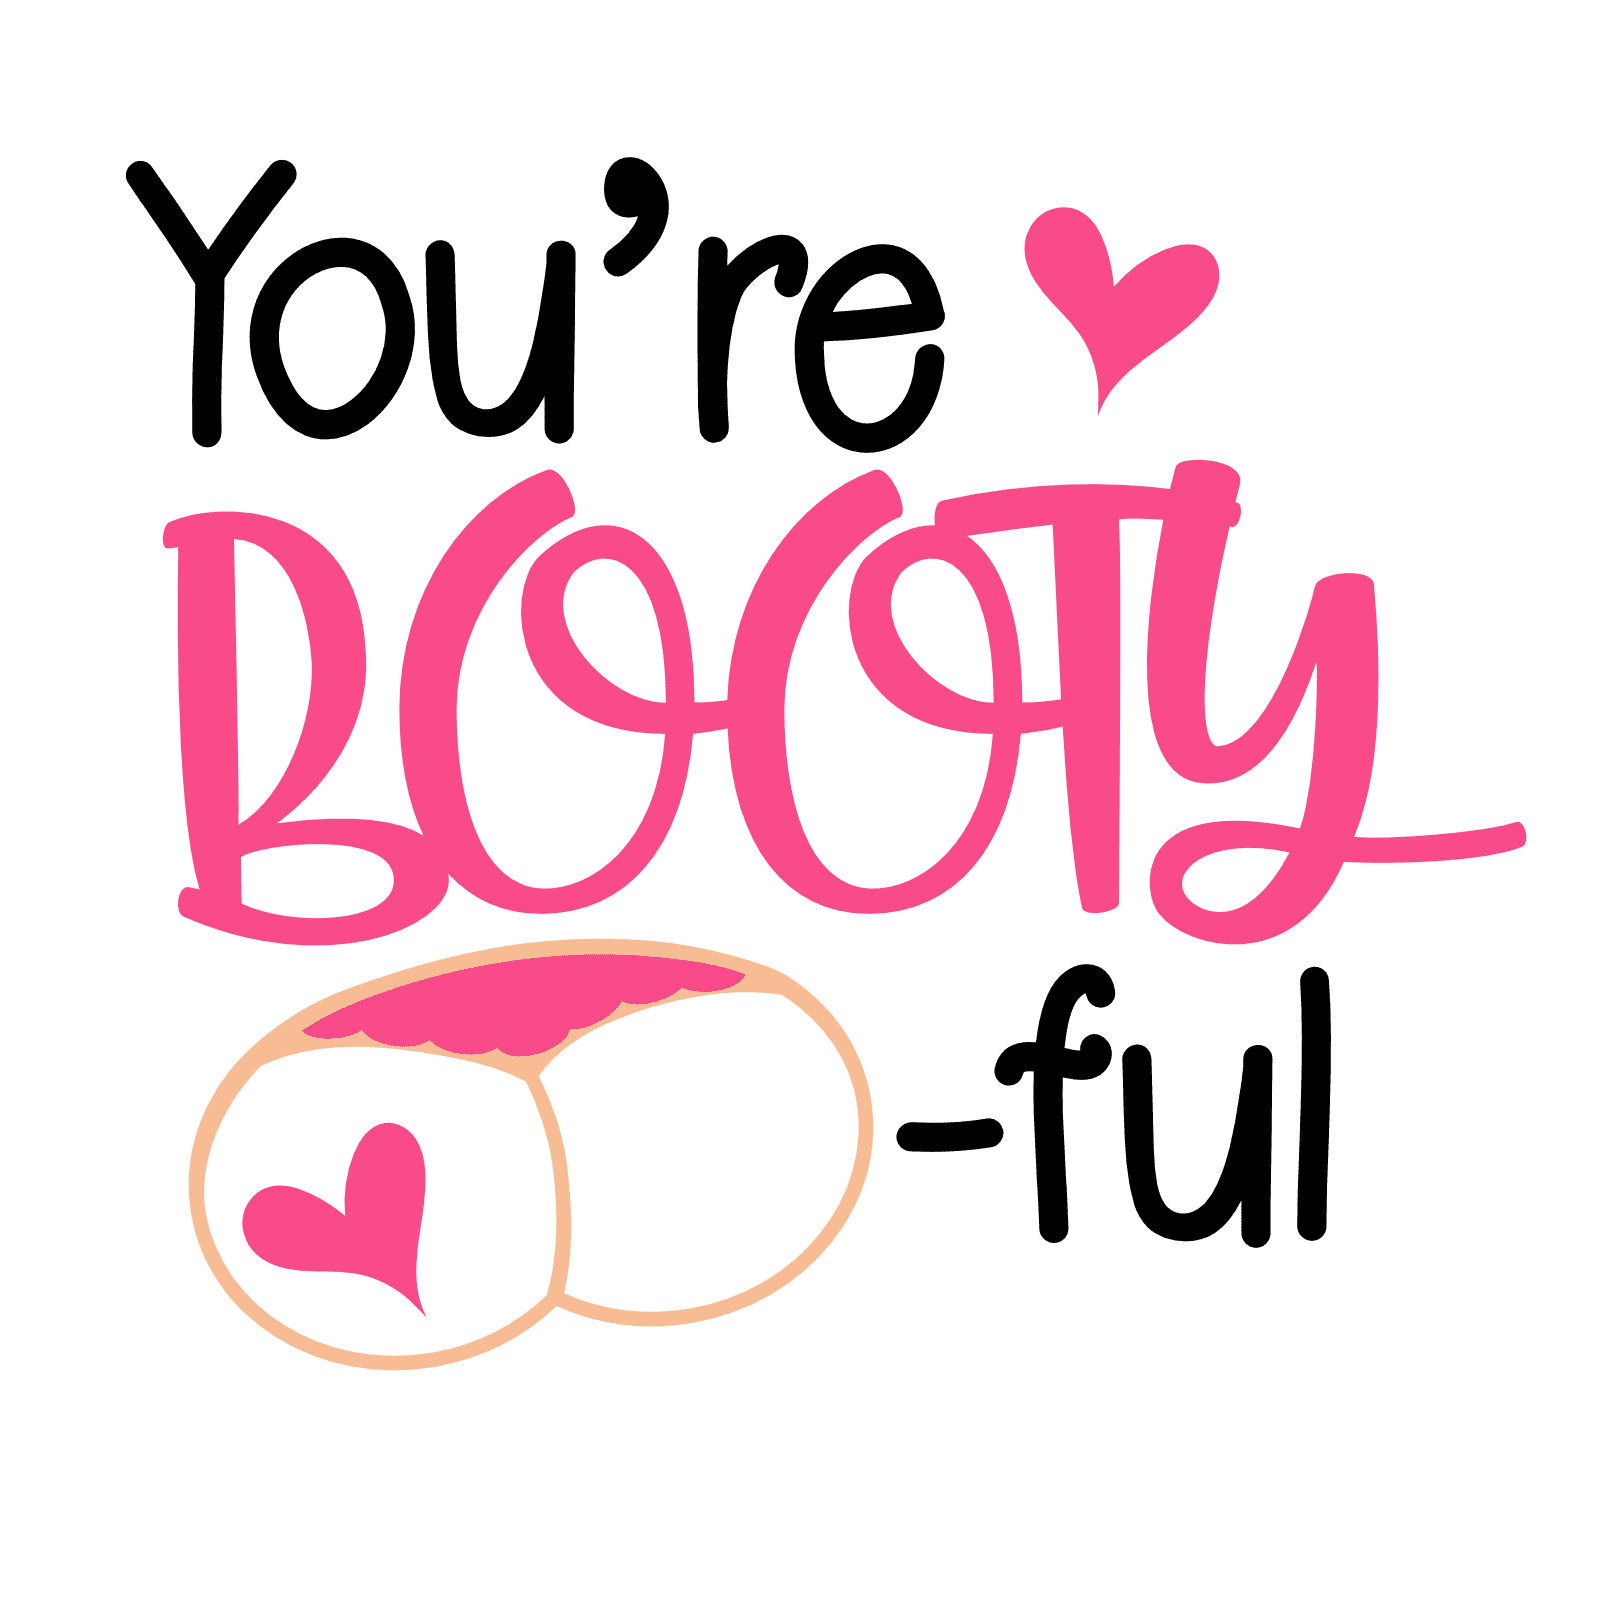 youre-booty-ful-girl-funny-valentines-day-free-svg-file-SvgHeart.Com